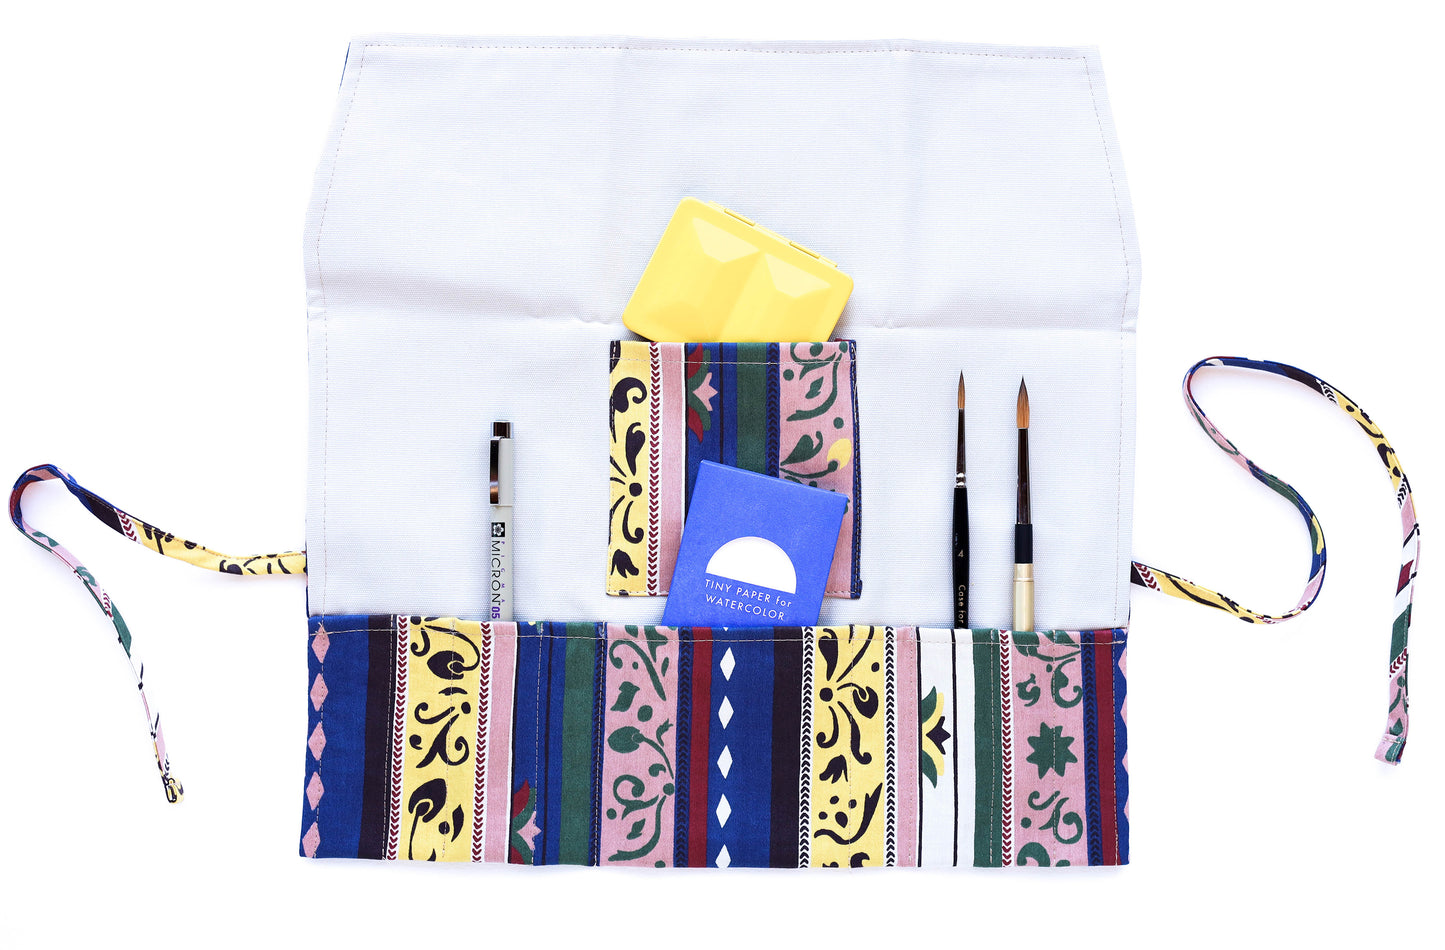 The open Pulcinella pattern brush roll shown with a sampling of brushes, a pen, a simple travel palette, and a tiny paper pack.